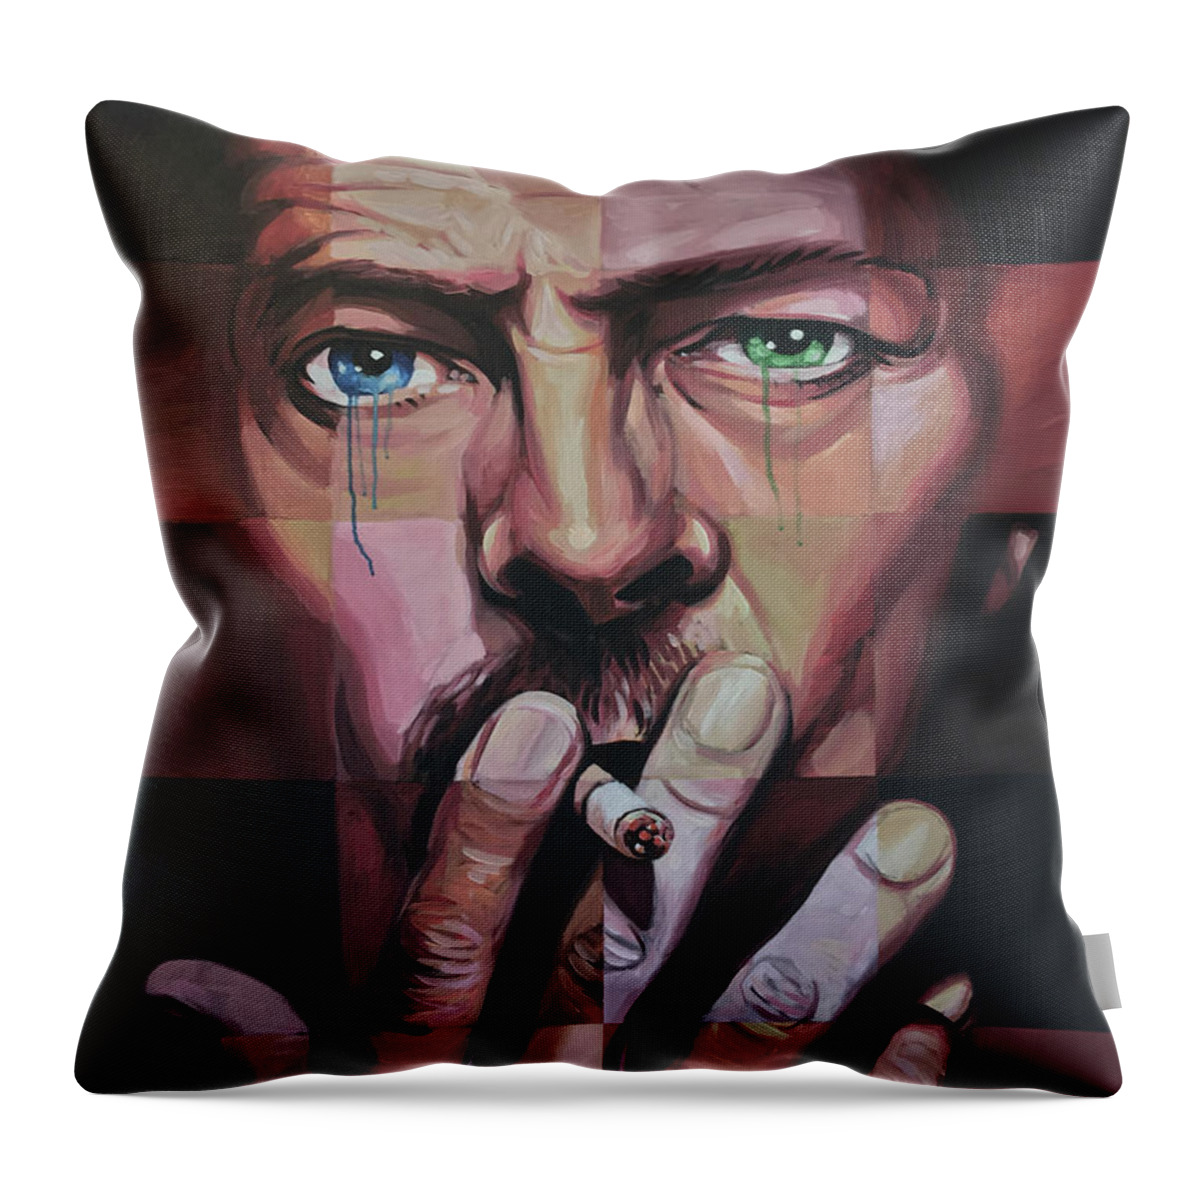 David Throw Pillow featuring the painting David Bowie by Steve Hunter